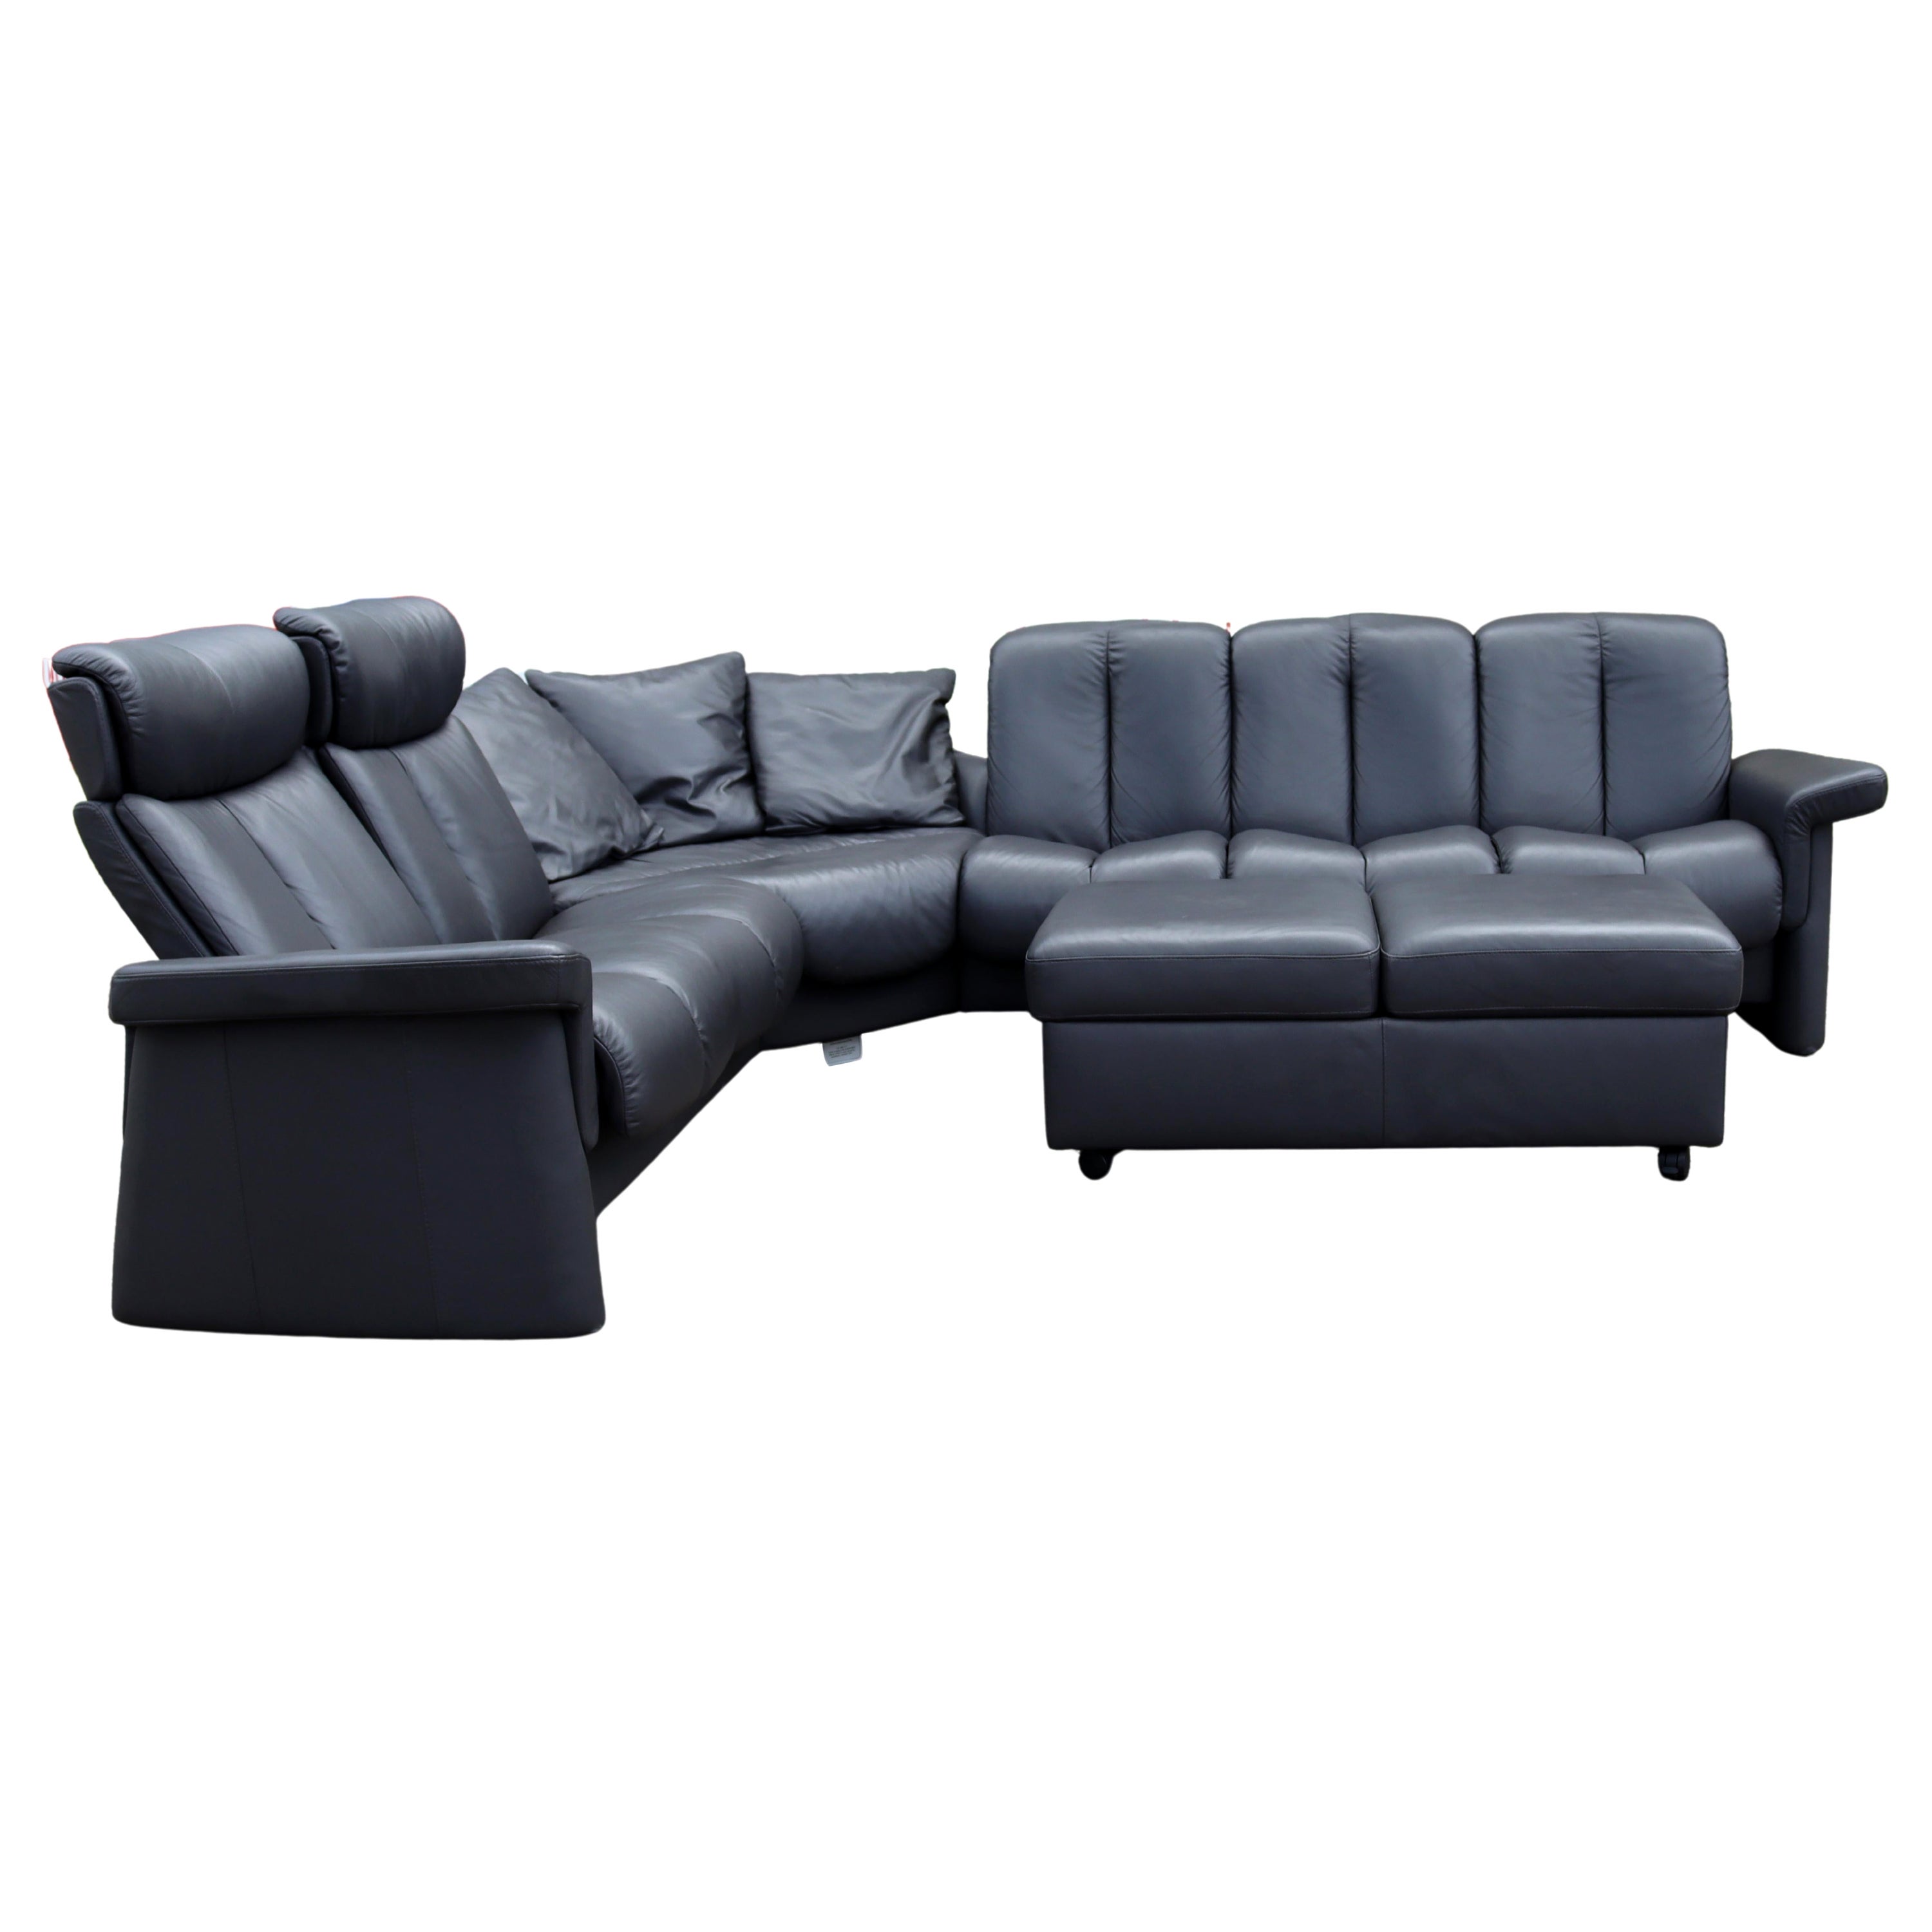 Leather Sectional Sofa Norway W Ottoman, Black Leather Sectional Couch With Ottoman